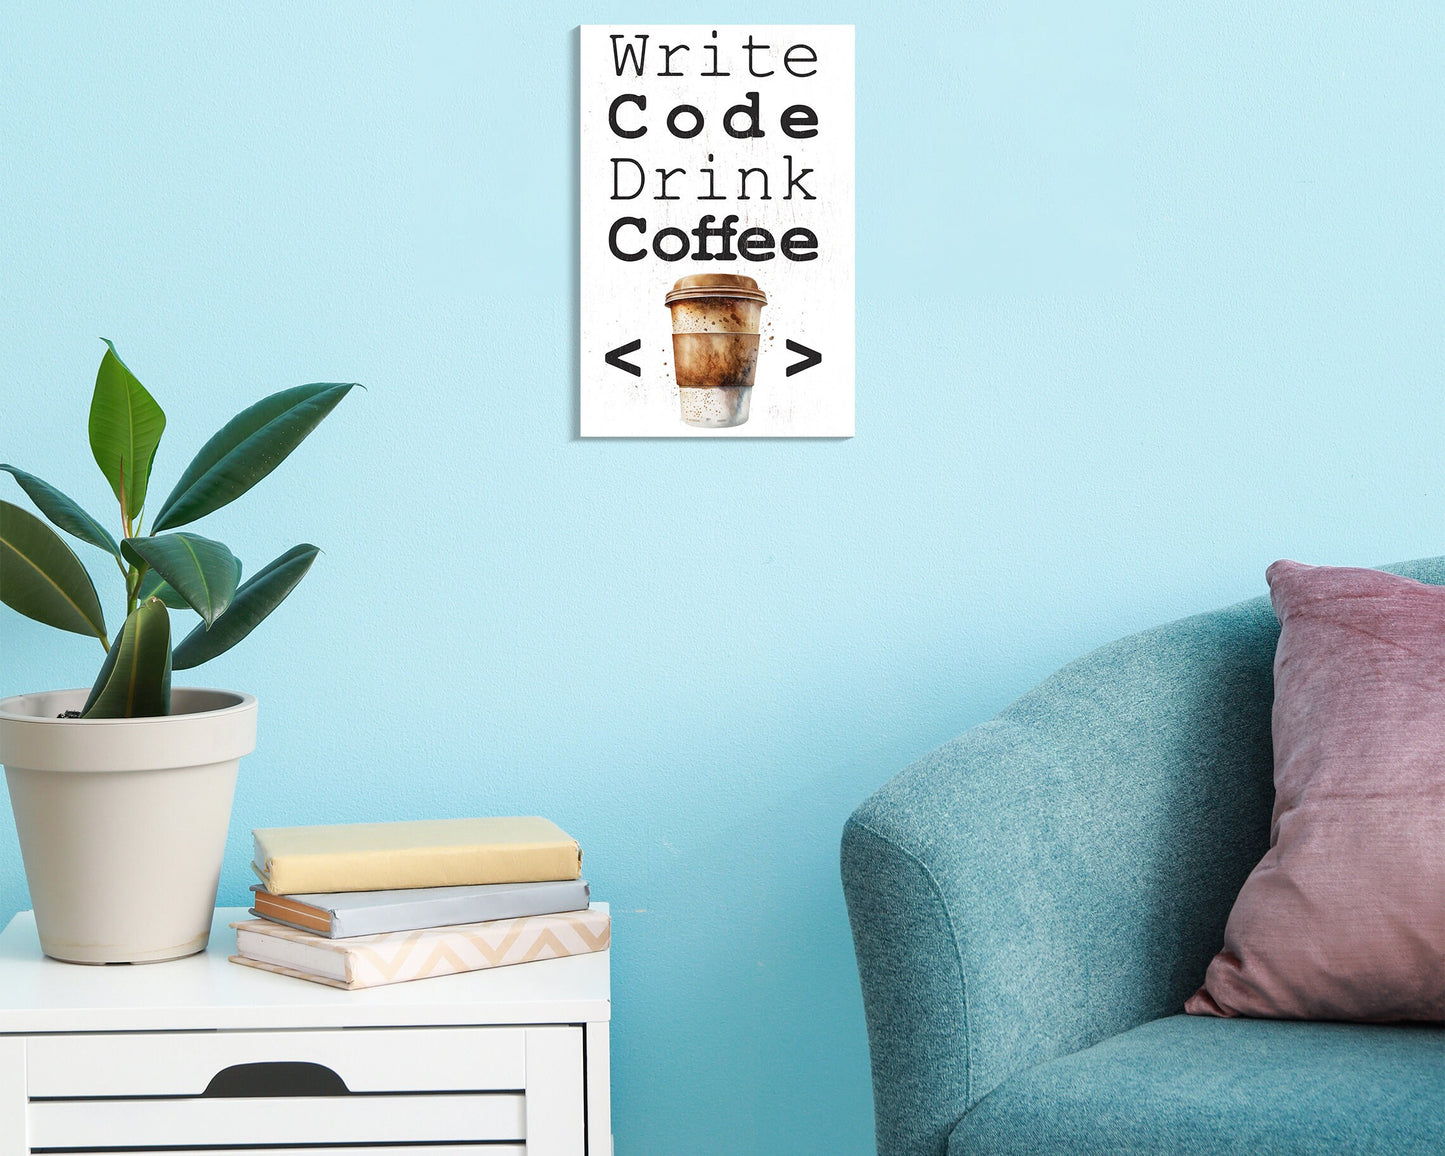 Write Code Drink Coffee - 7.5in x 5in Wooden Wall Decor Sign - Programmer's Motto for Home & Office, Perfect Gift for Developers